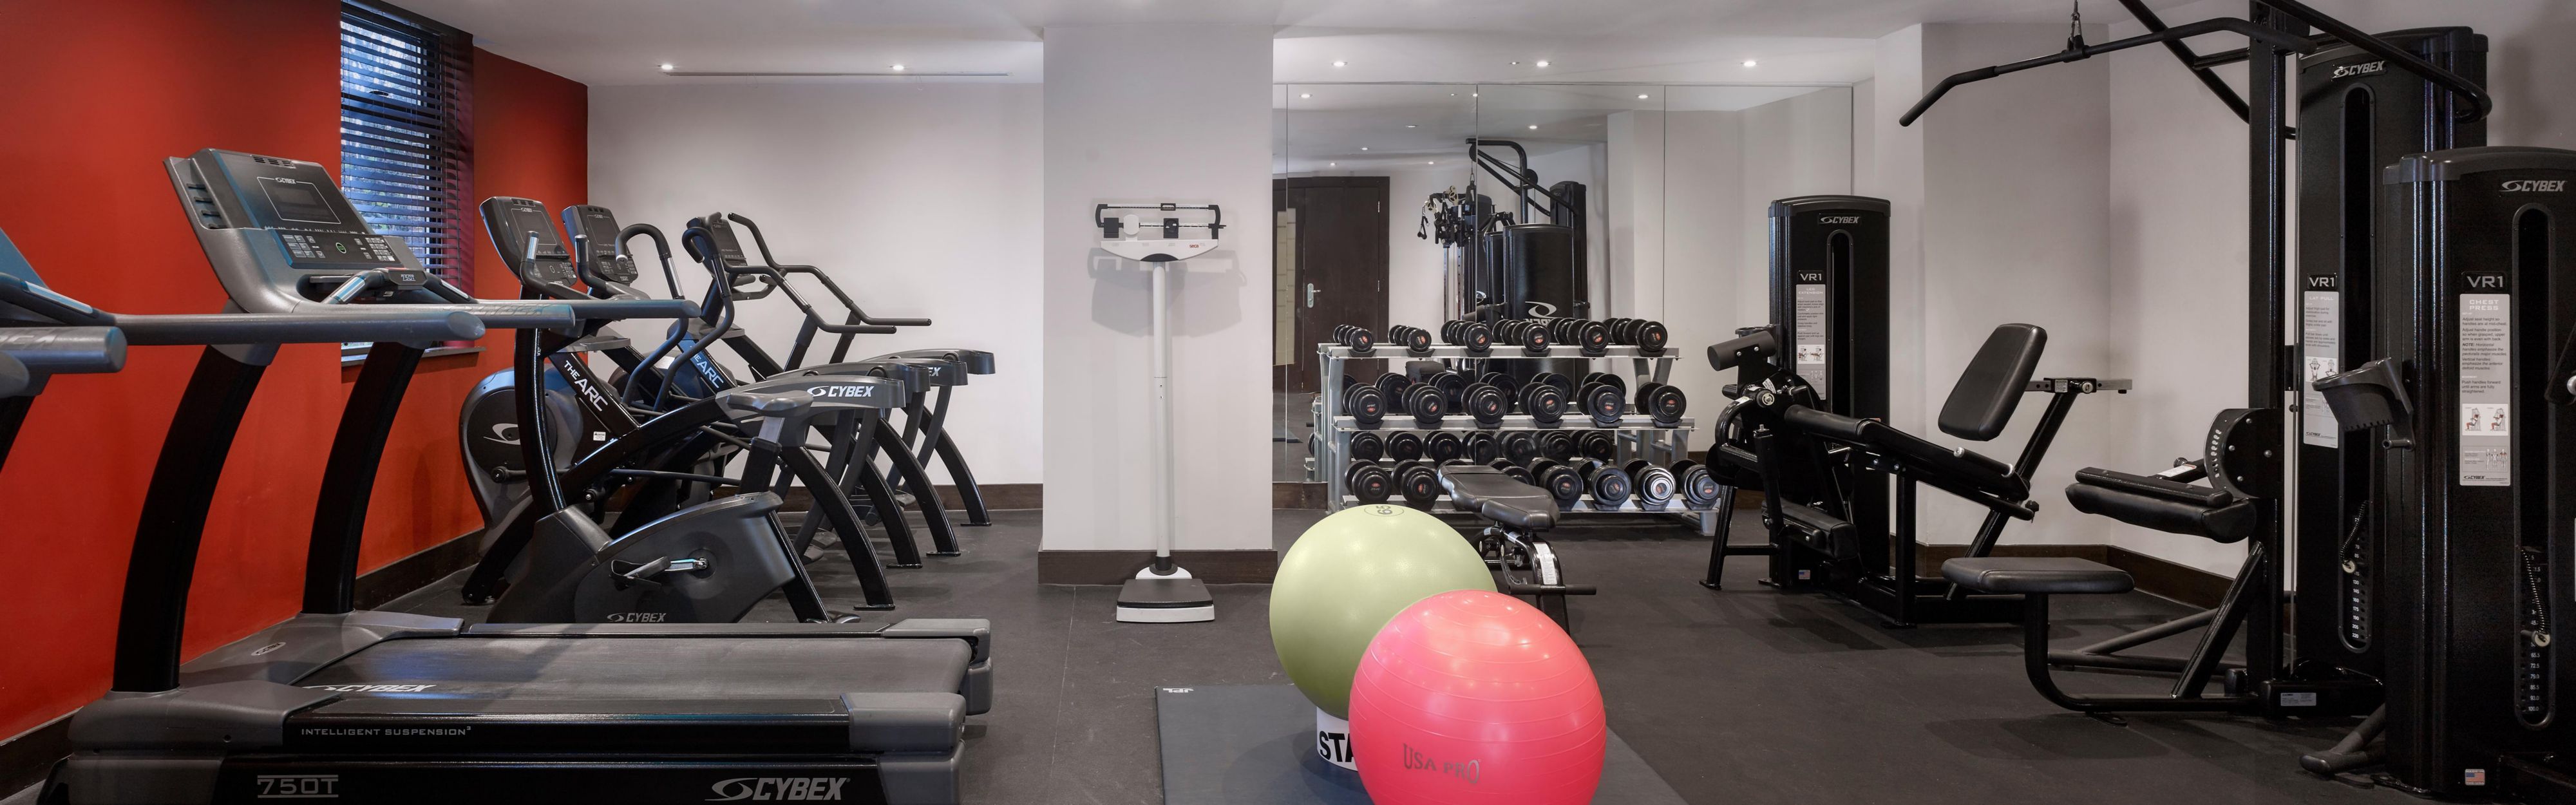 It's not all about business! Work out and destress in our 24hr gym